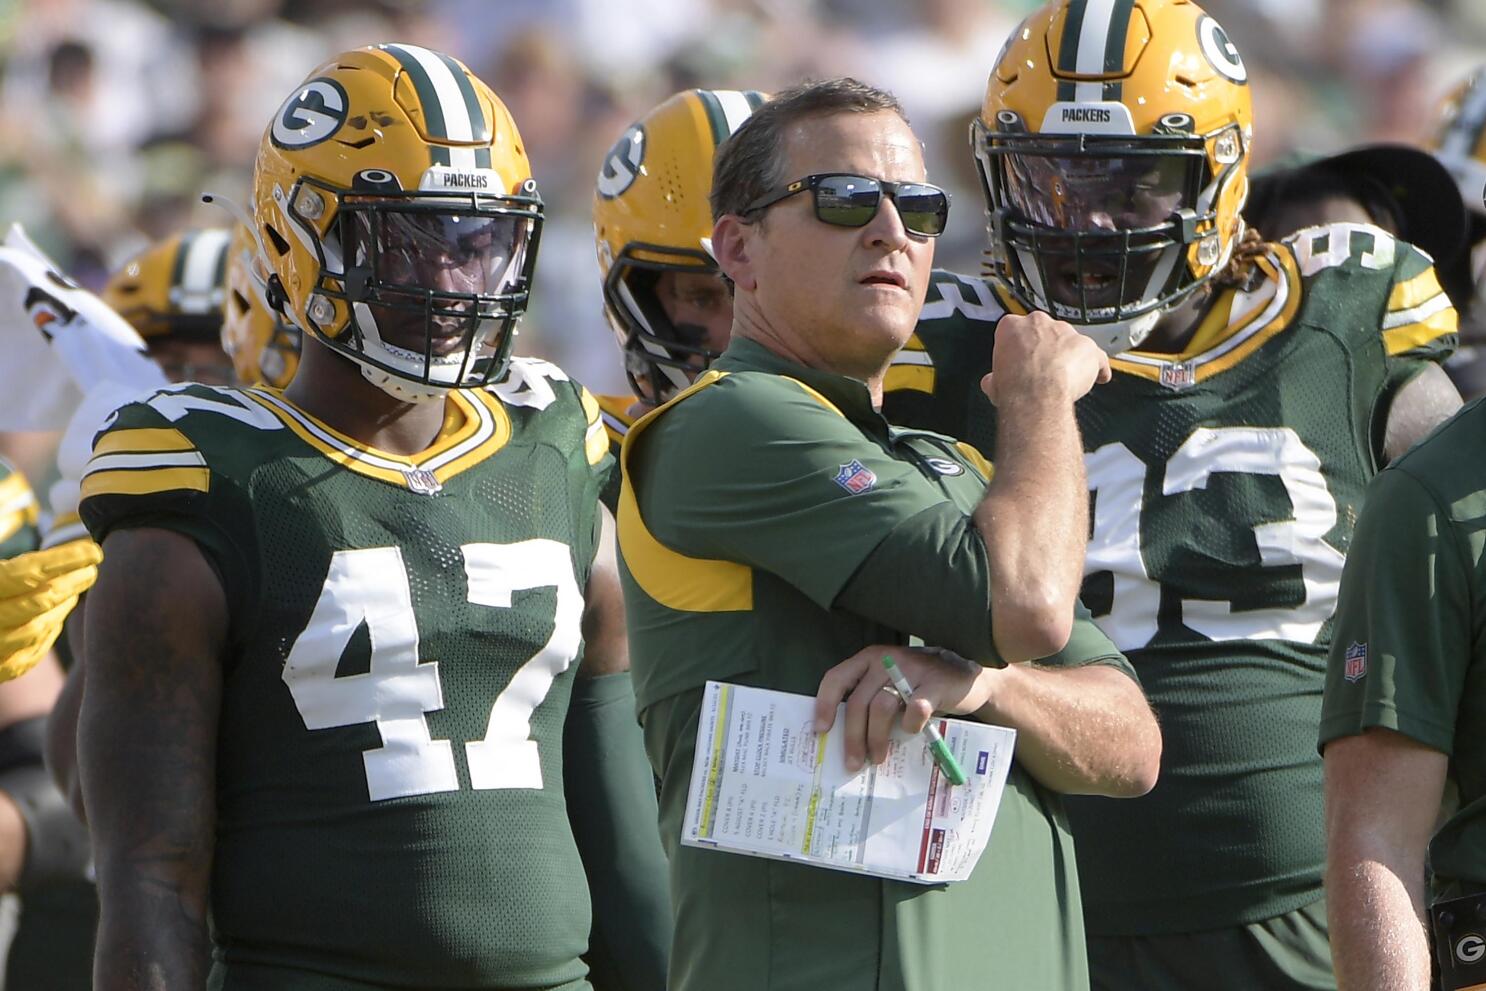 Barry discusses how Packers' defense must improve: 'It starts with me'